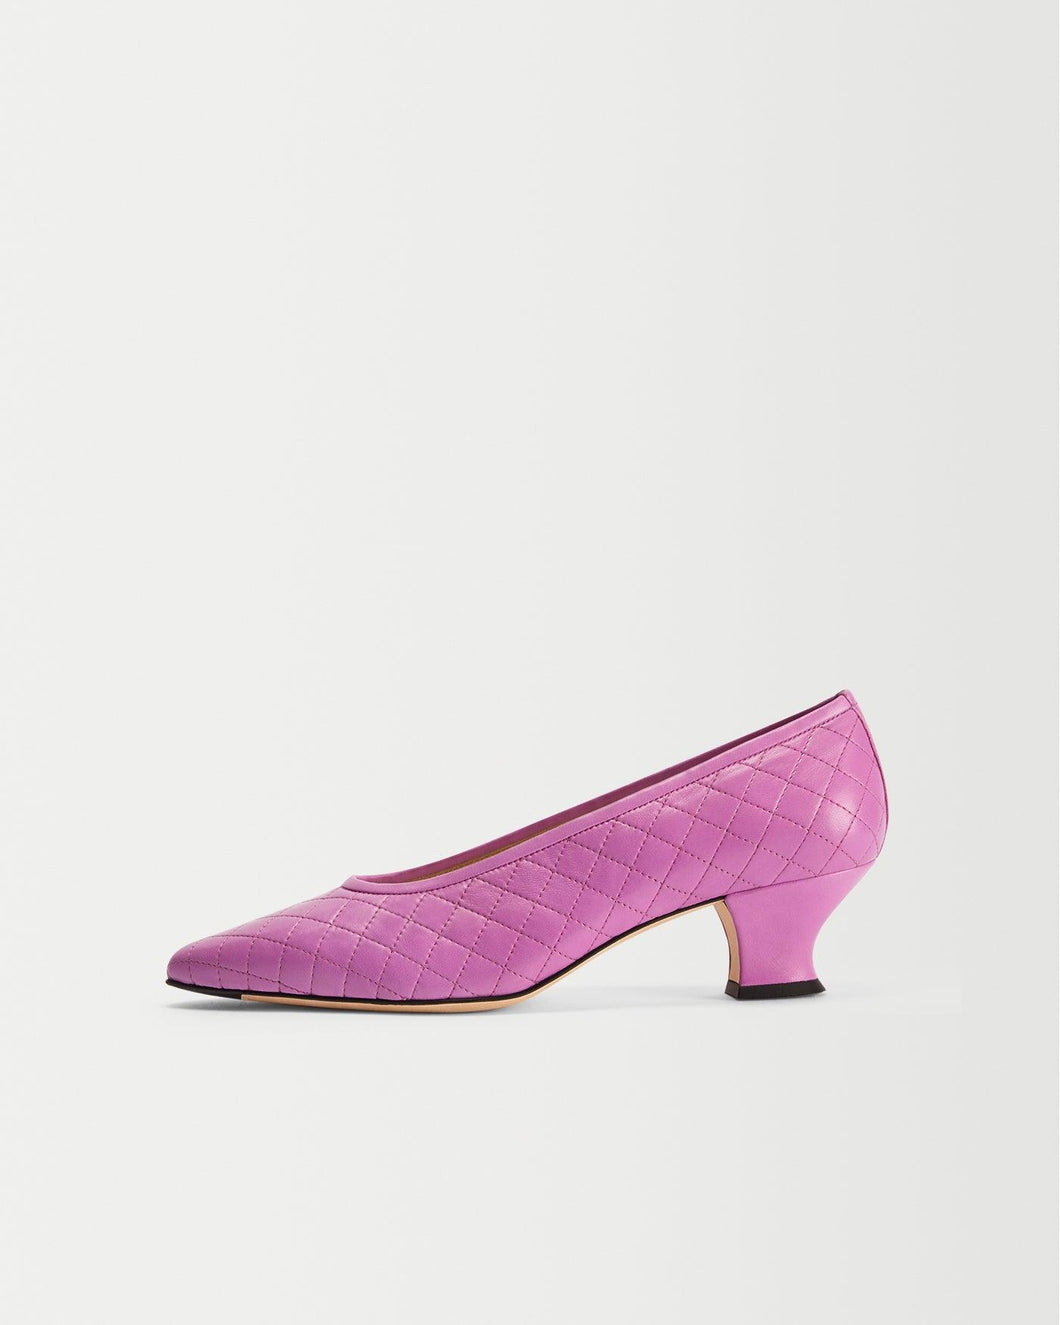 Side view of Yuni Buffa Roma Pump shoe in Peony pink color made in Italy with soft quilted Italian Lamb Nappa leather